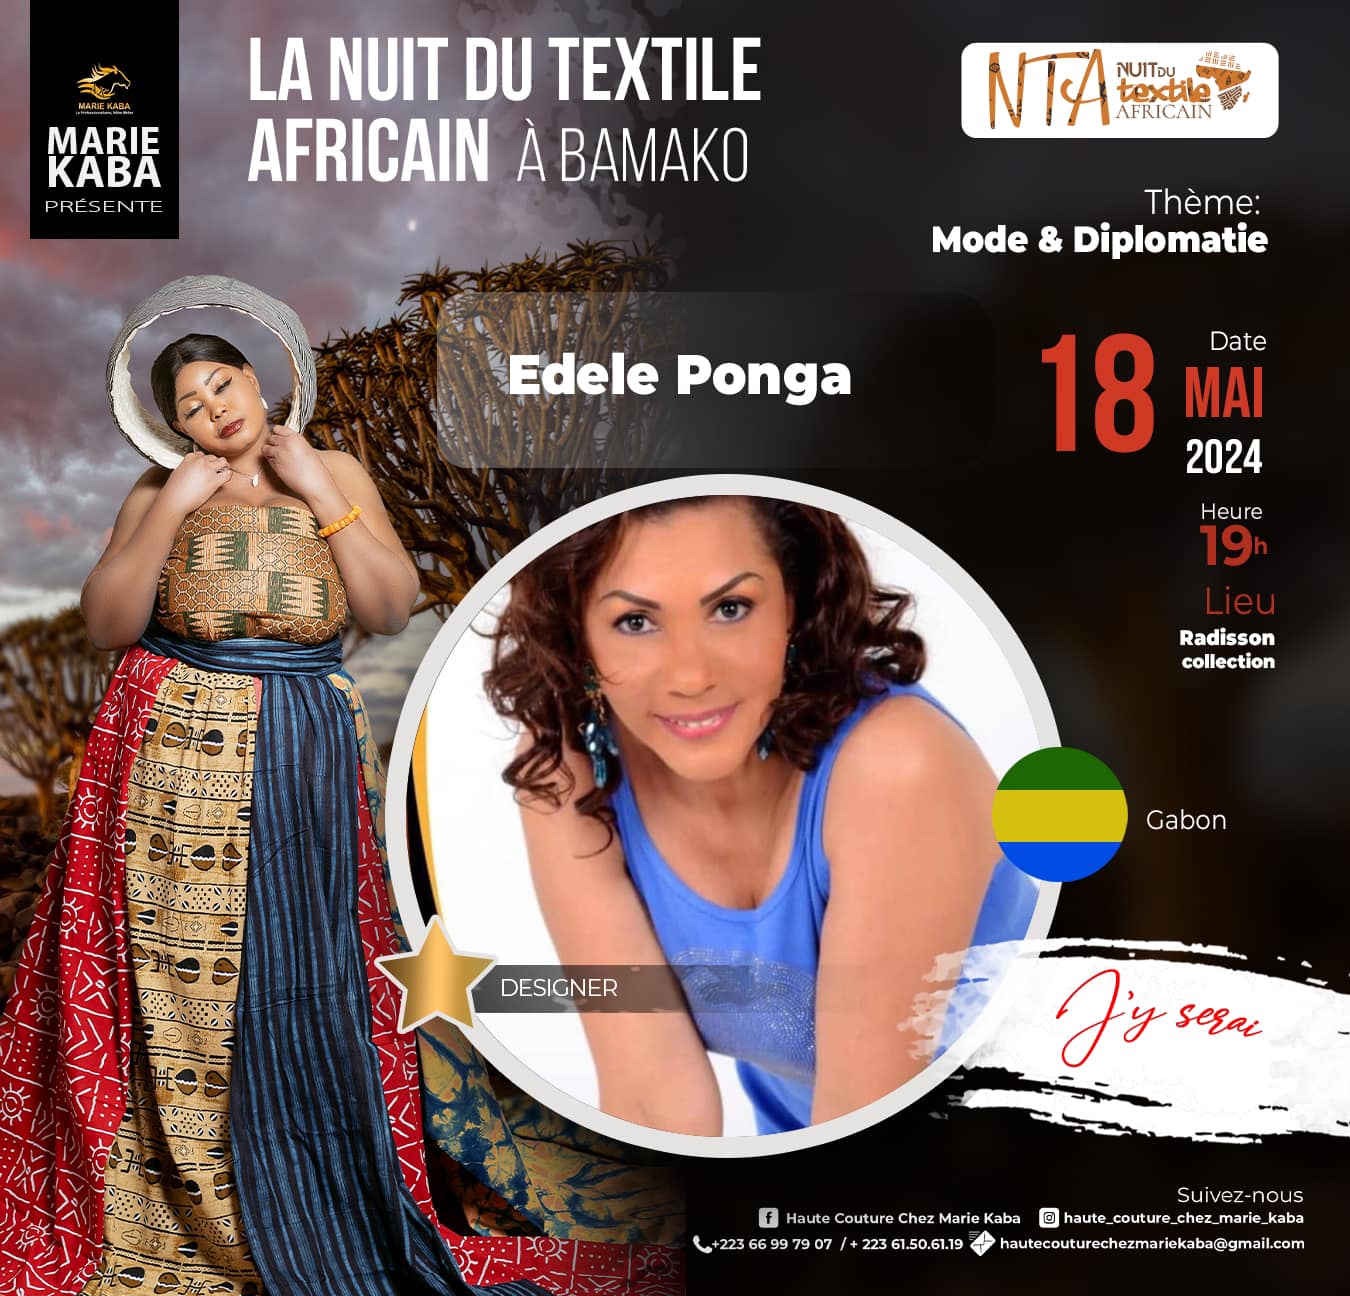 The Night of African Textile (NTA) First Edition by Marie Kaba, a ...